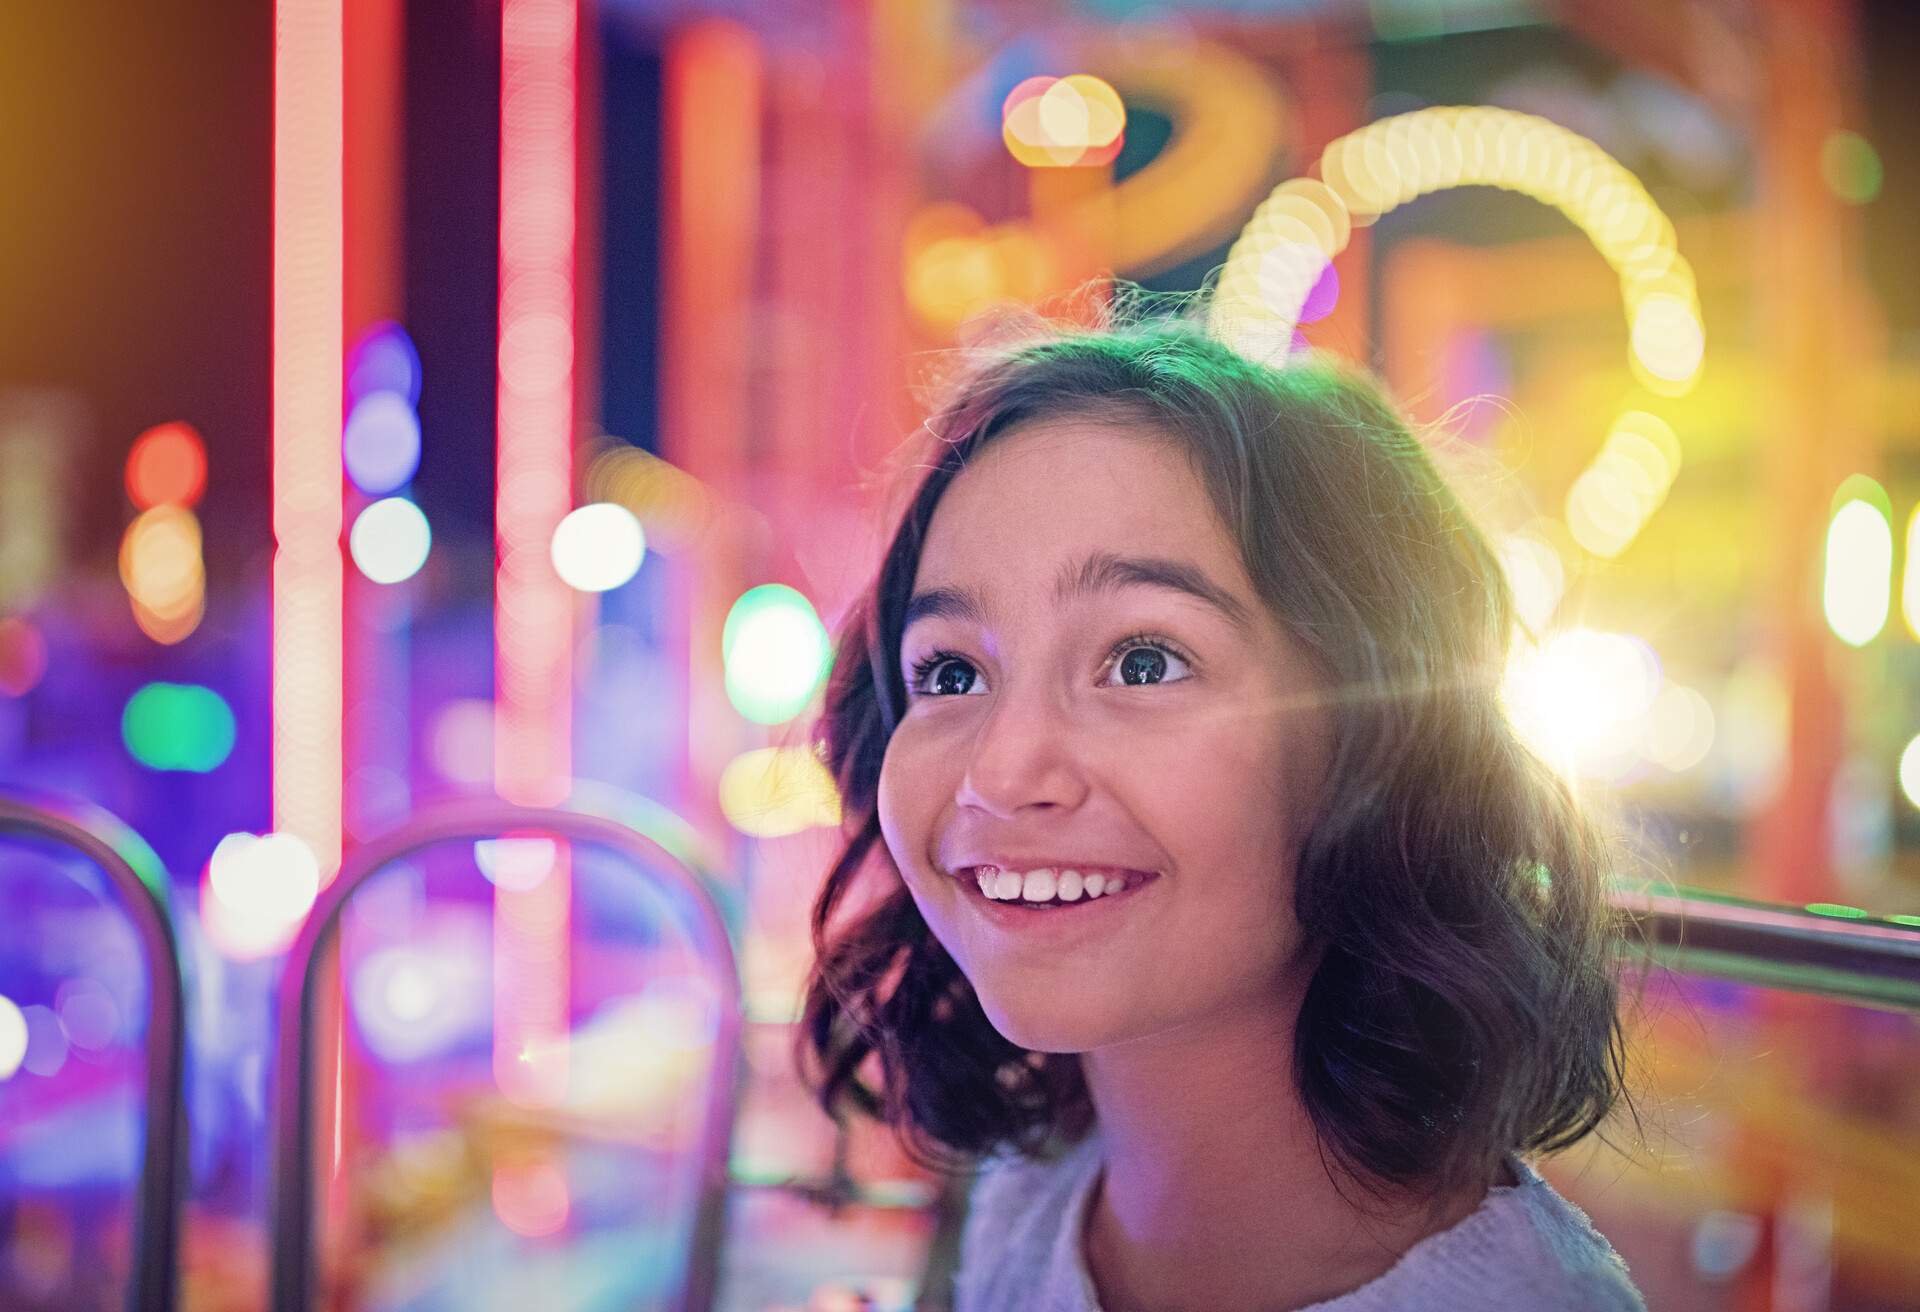 A little girl beaming with delight as she looks around an amusement park.